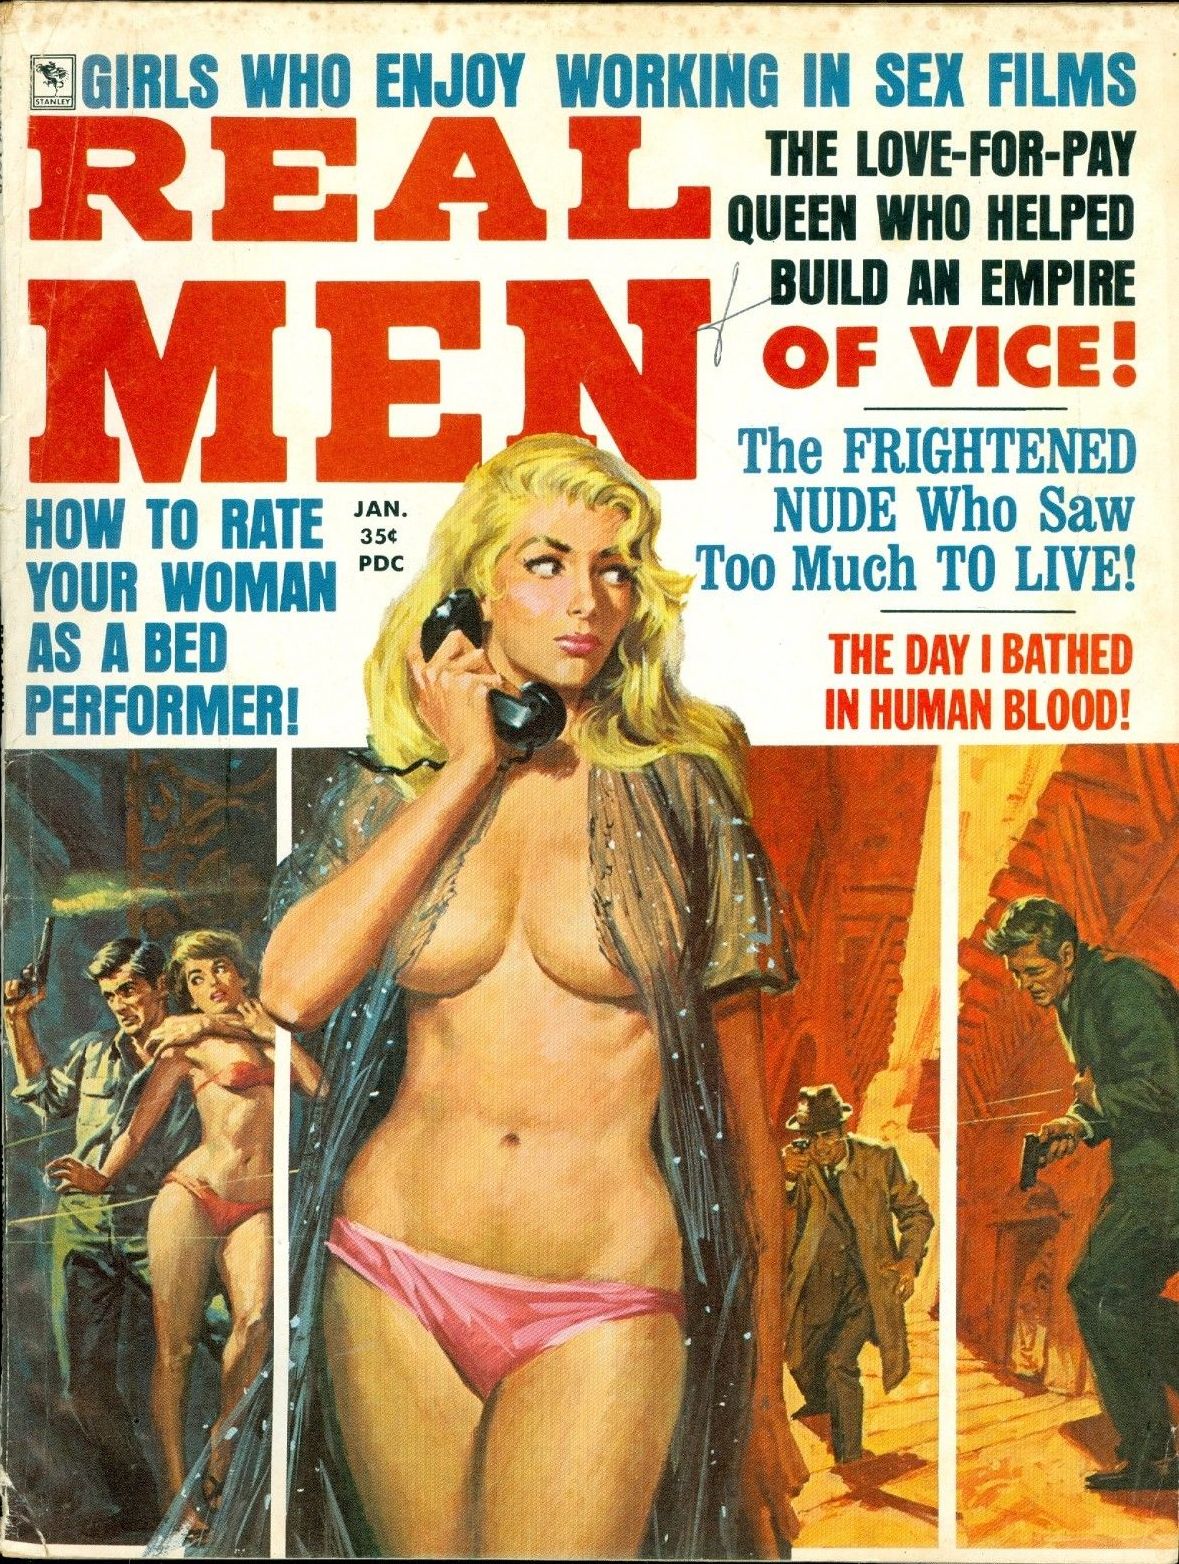 The Frightened Nude Who Saw Too Much To Live Pulp Covers